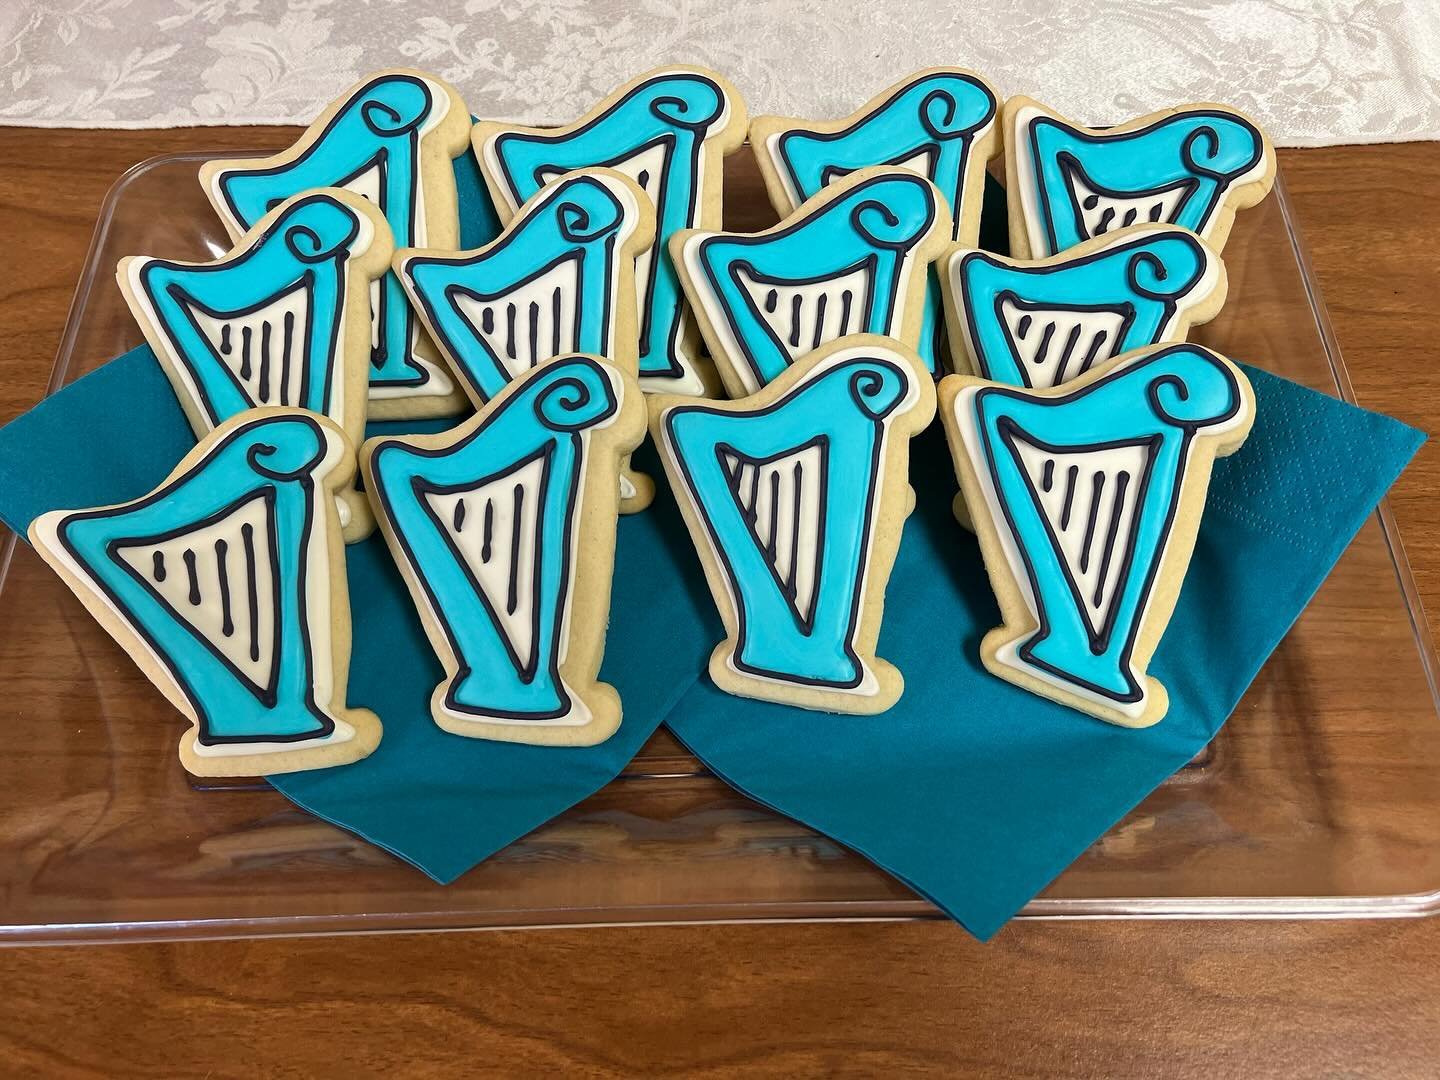 The harp cookies for today&rsquo;s Valley Catholic recital came out so cute! 🎵🍪 (the Valley Catholic colors are blue and white 🤍💙)
The students played great and even convinced me to perform! 
Whew&hellip; what a day!